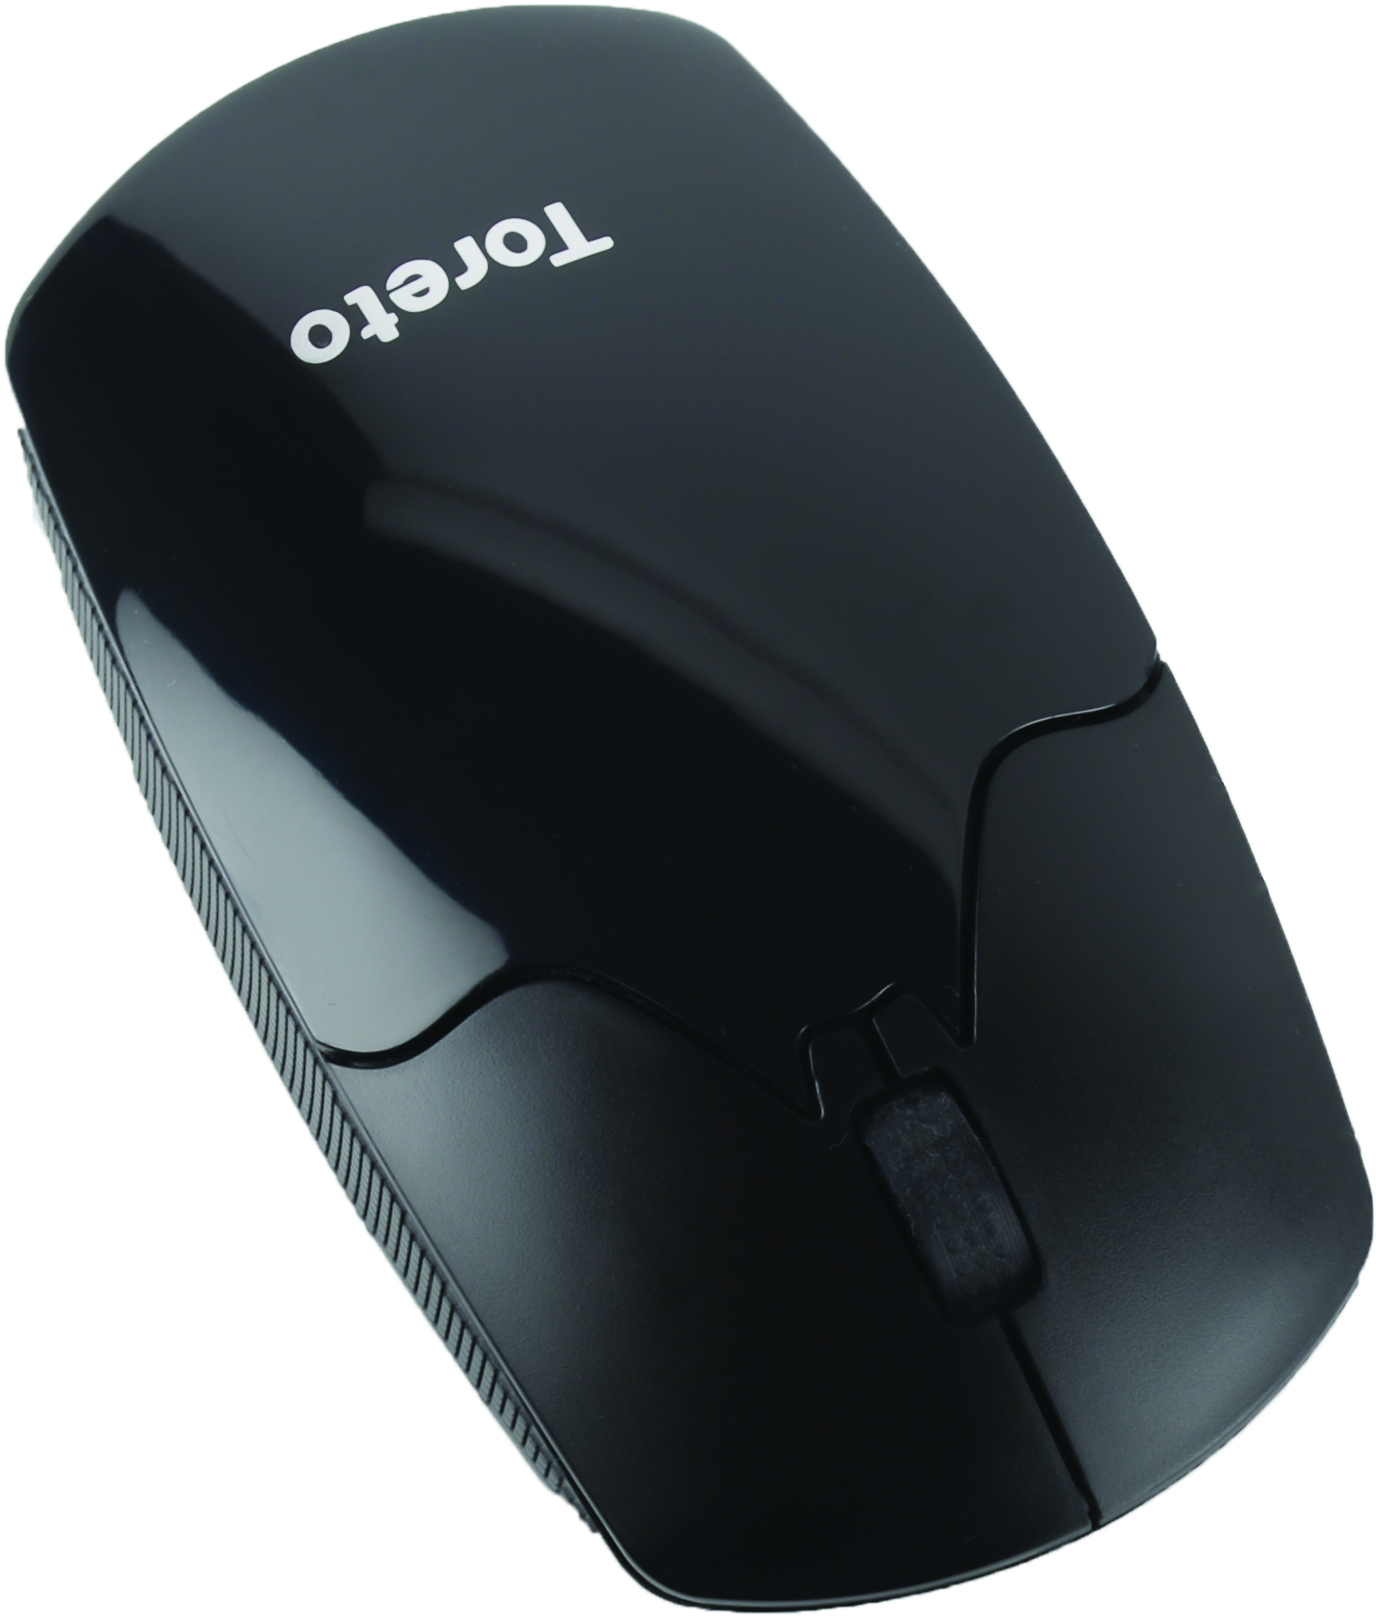 You are currently viewing Toreto Launches Wireless Mouse SHADOW TOR 952